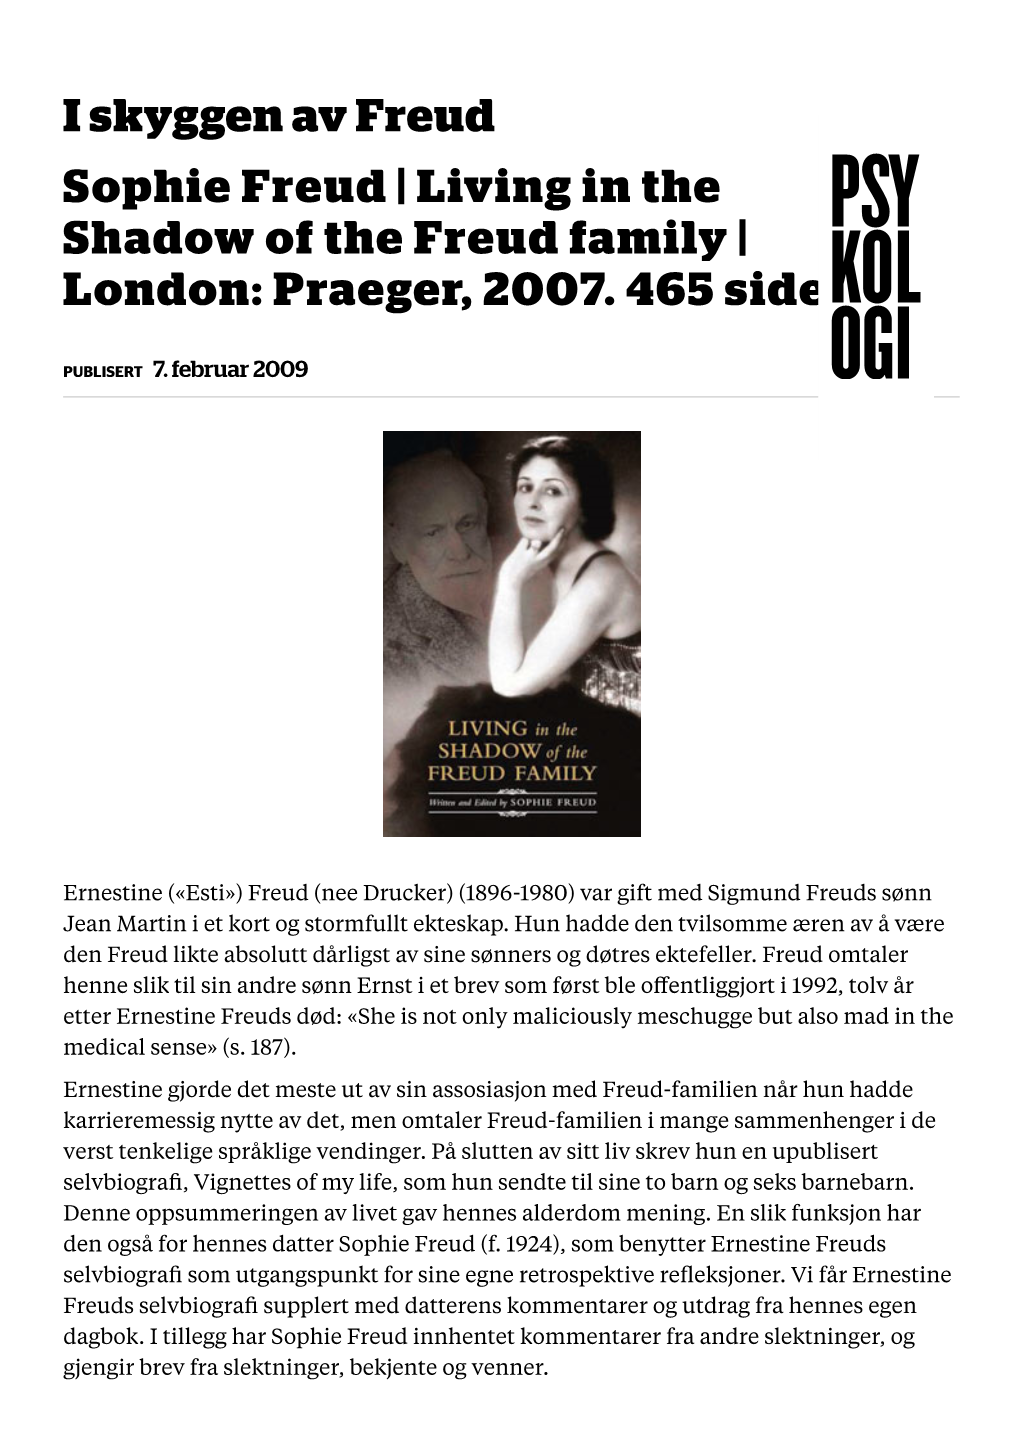 Living in the Shadow of the Freud Family | London: Praeger, 2007. 465 Sider